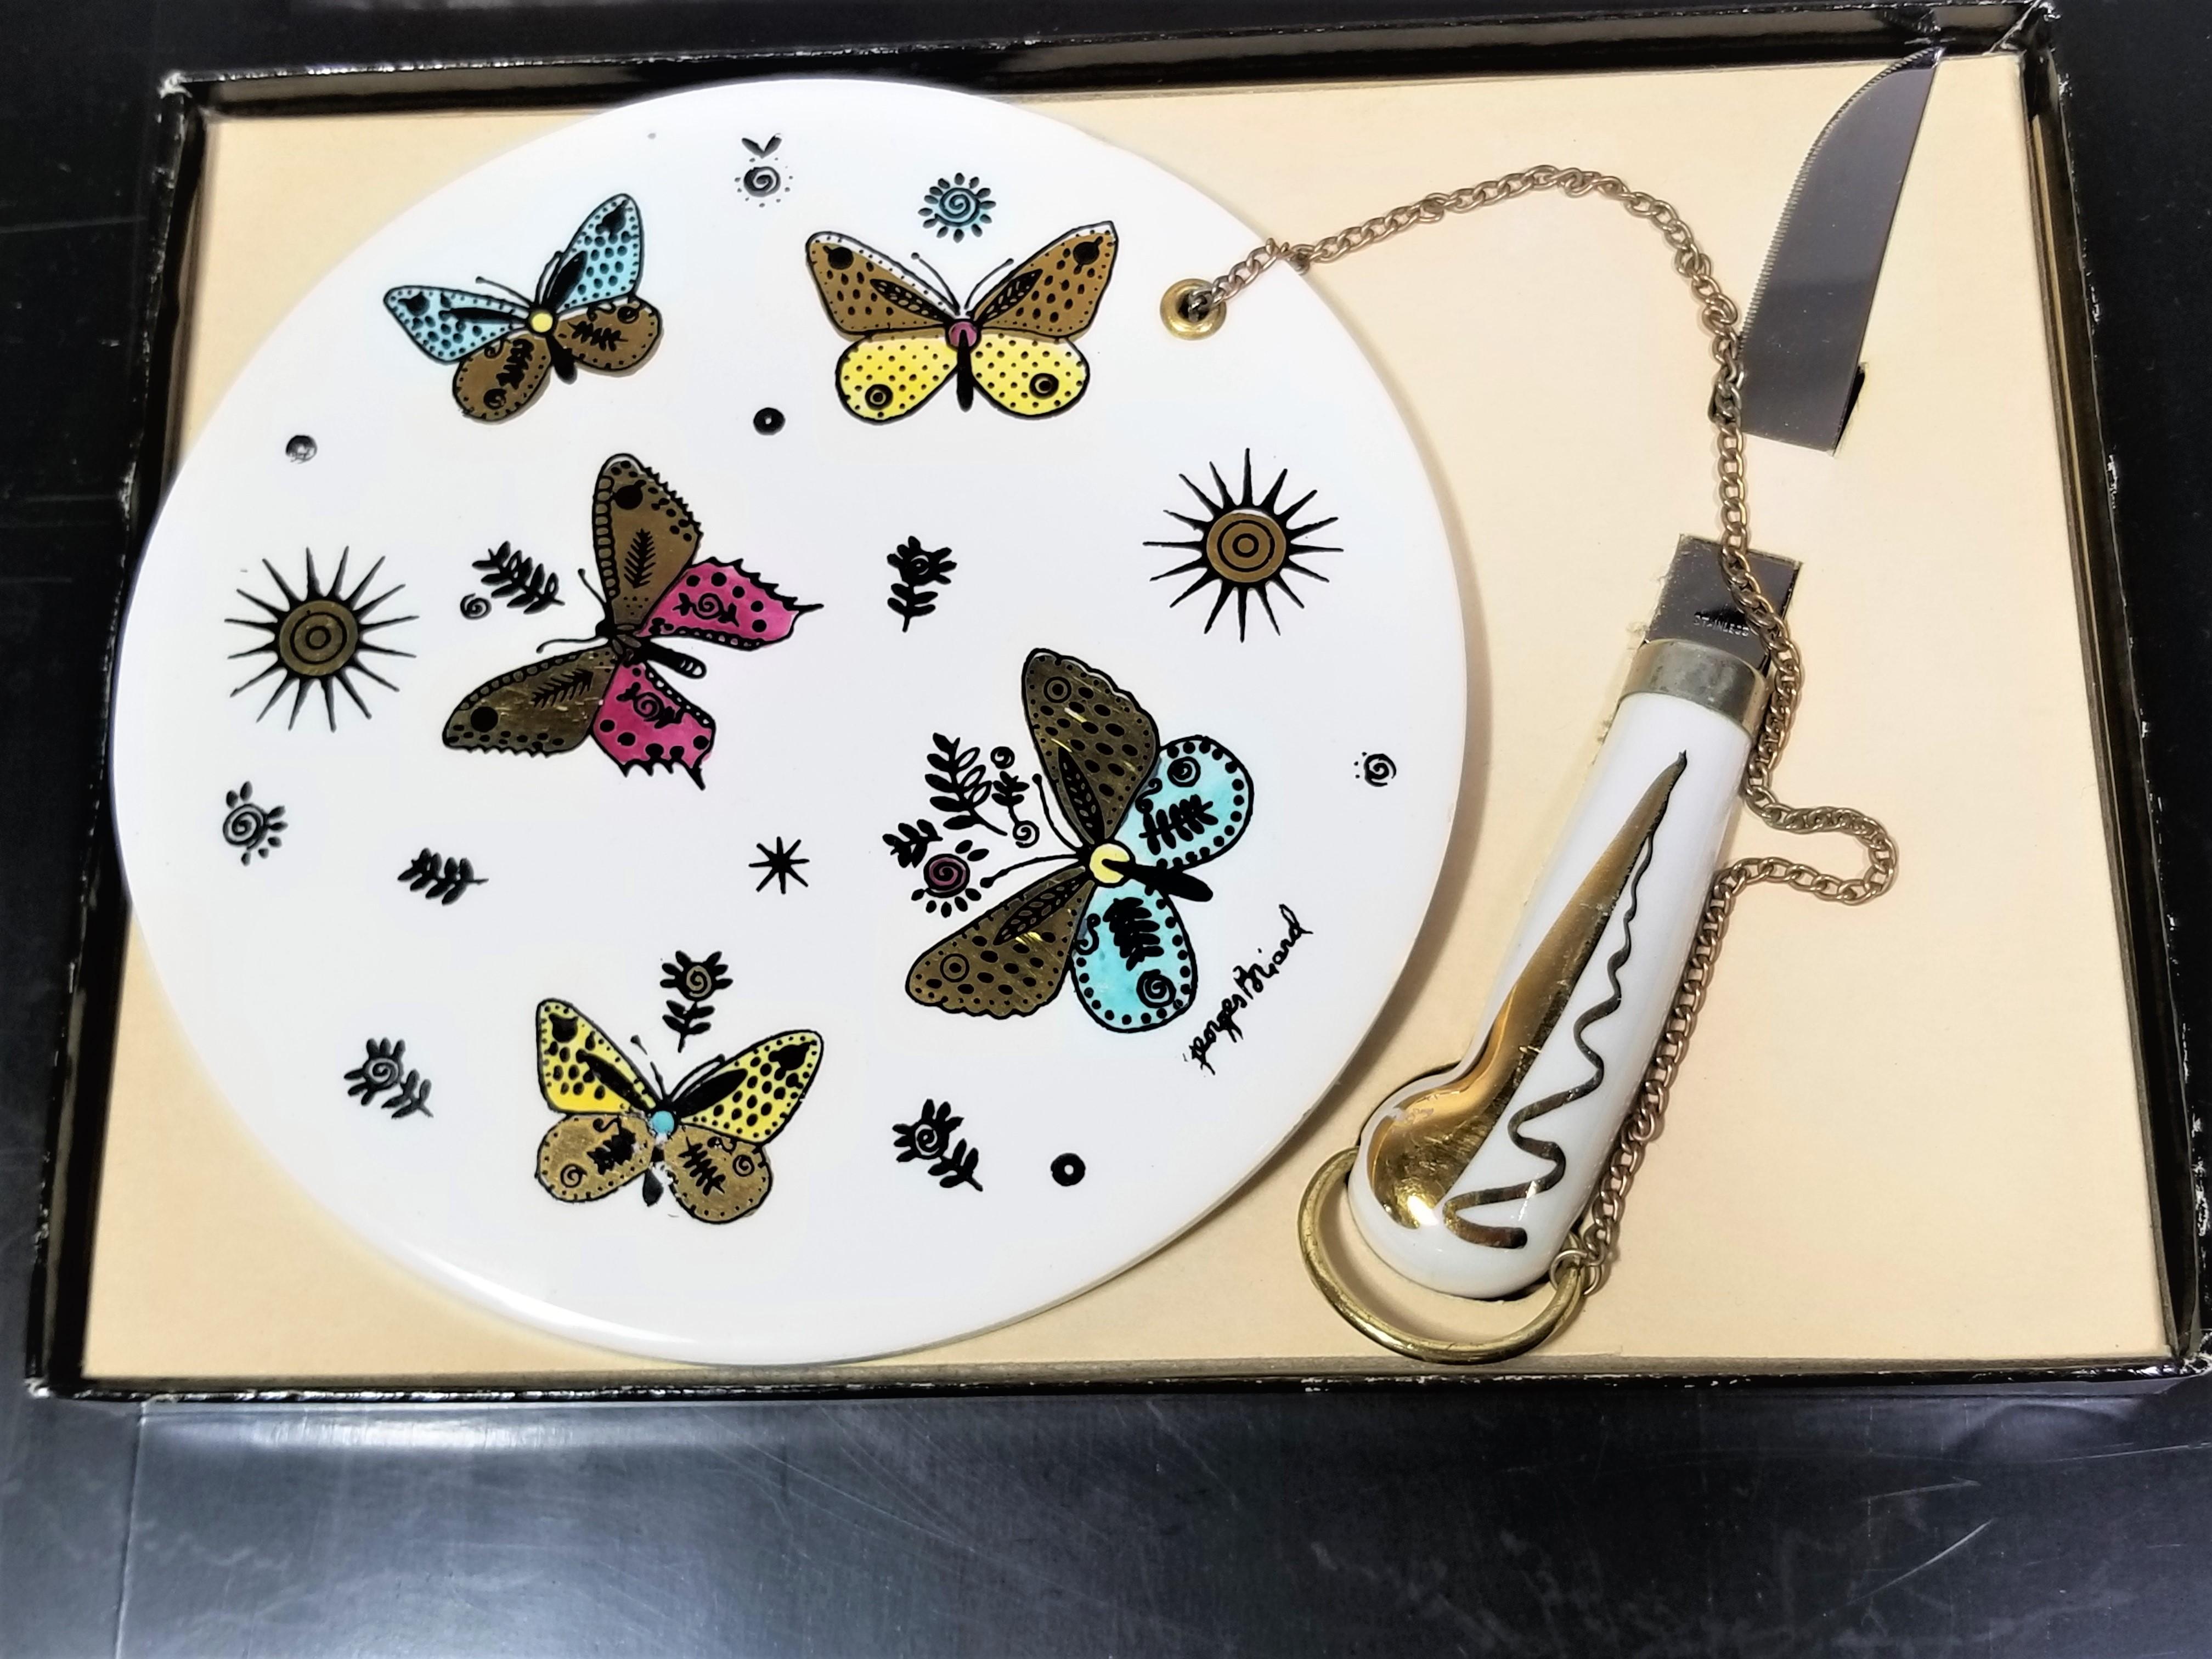 Rare mid century 1960s signed Georges Briard cheese serving plate or platter with Knife. Ceramic plate with gold gilded accents and colorful butterfly motif. Knife is attached to plate with a gold chain. Never used and still in Original George